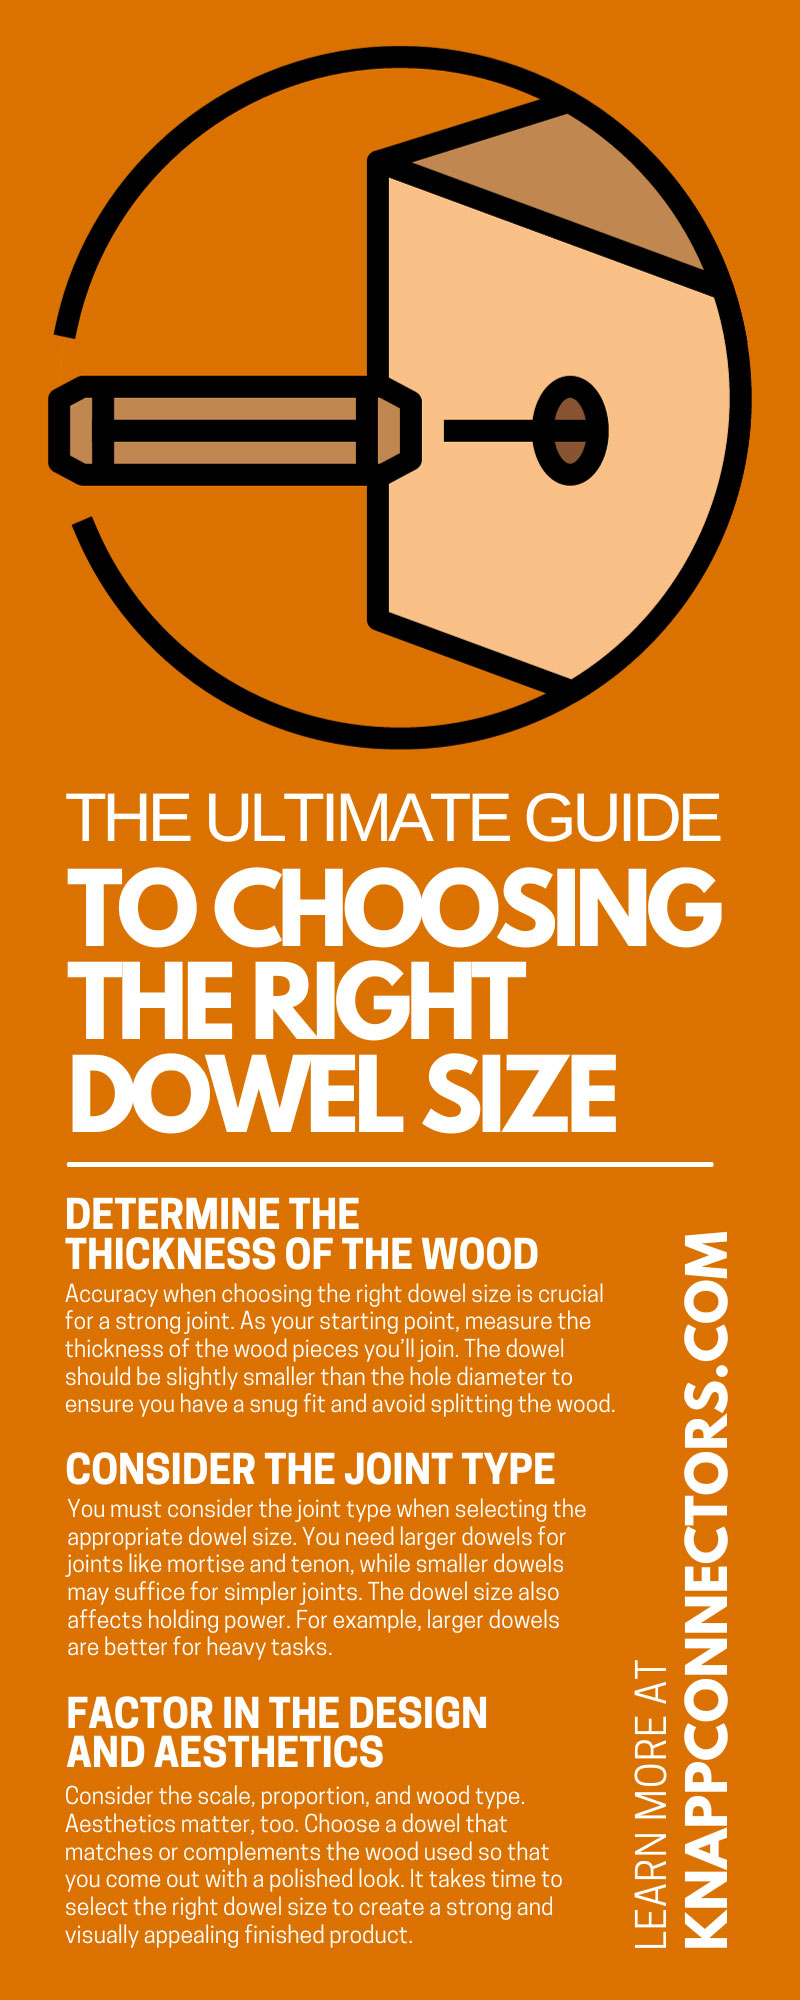 The Ultimate Guide to Choosing the Right Dowel Size